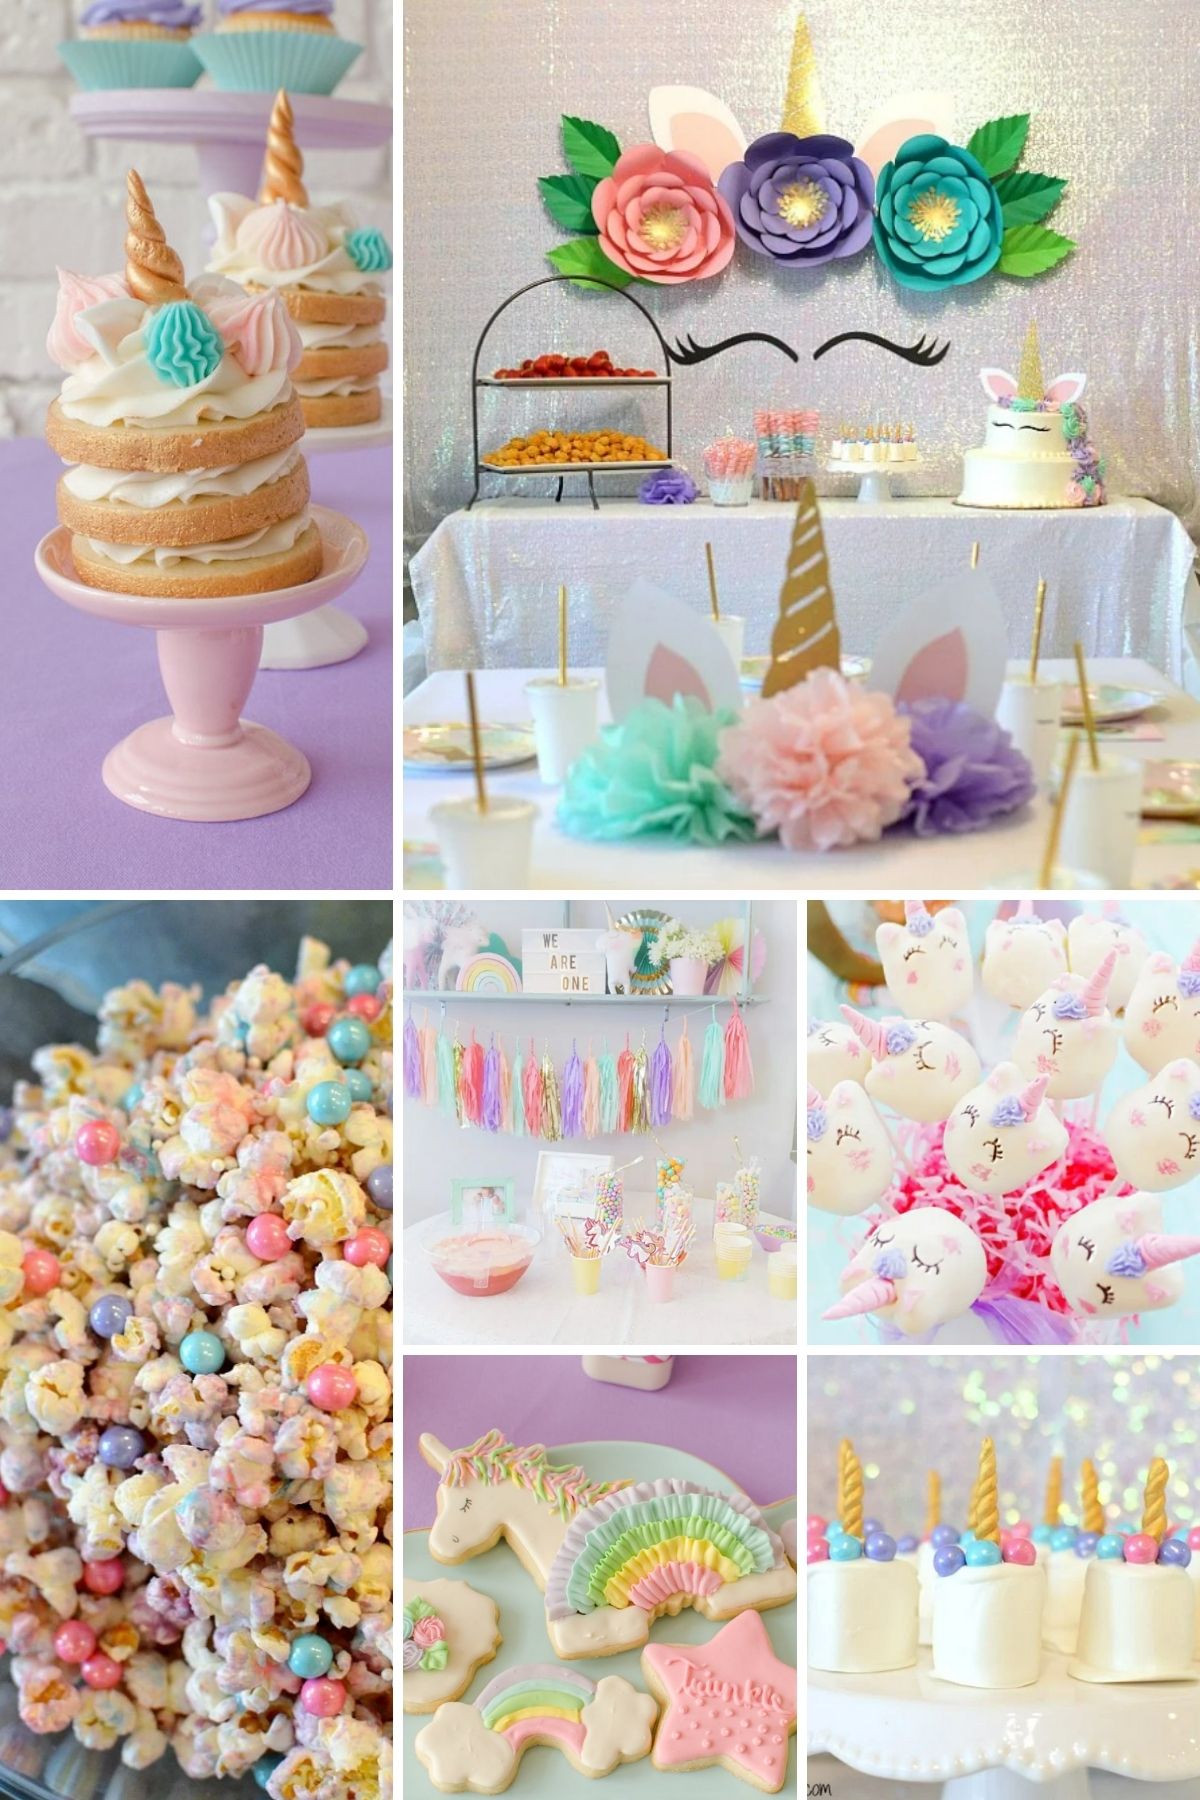 Photo collage from unicorn party theme including cupcakes, popcorn, and decorations.